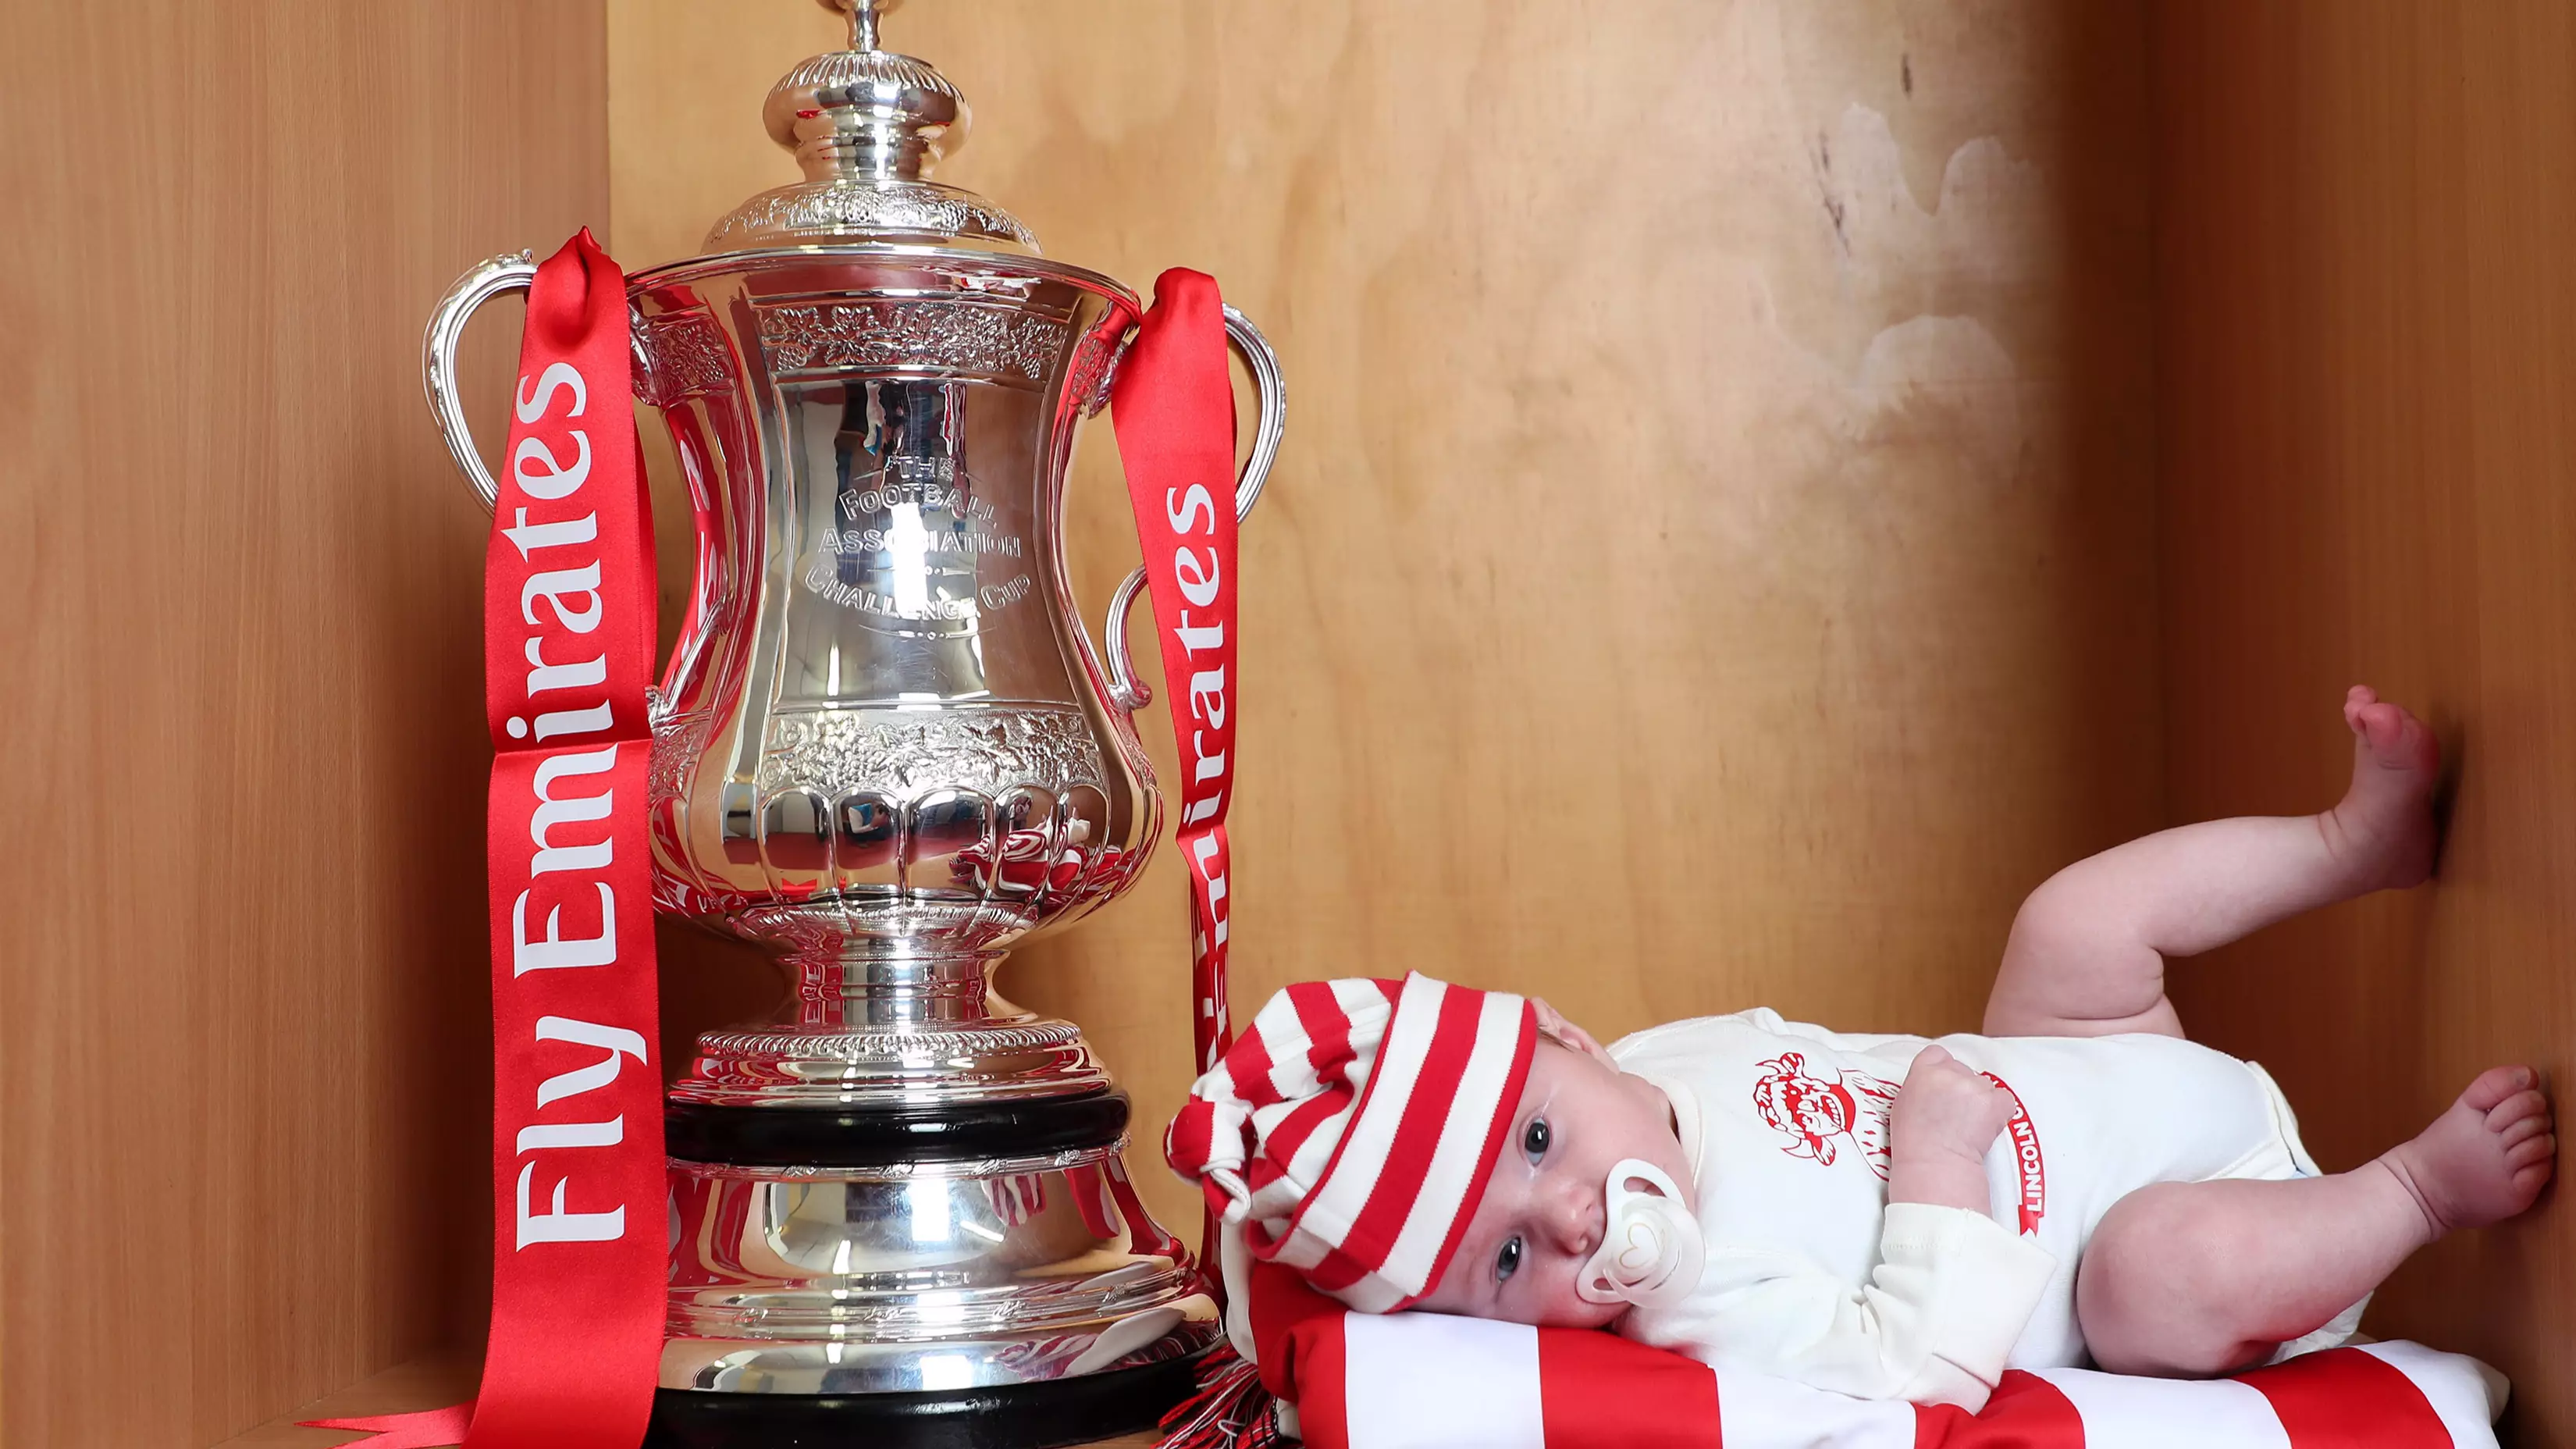 Lincoln City's Historic Emirates FA Cup Run Results In New Generation Of Junior Imps